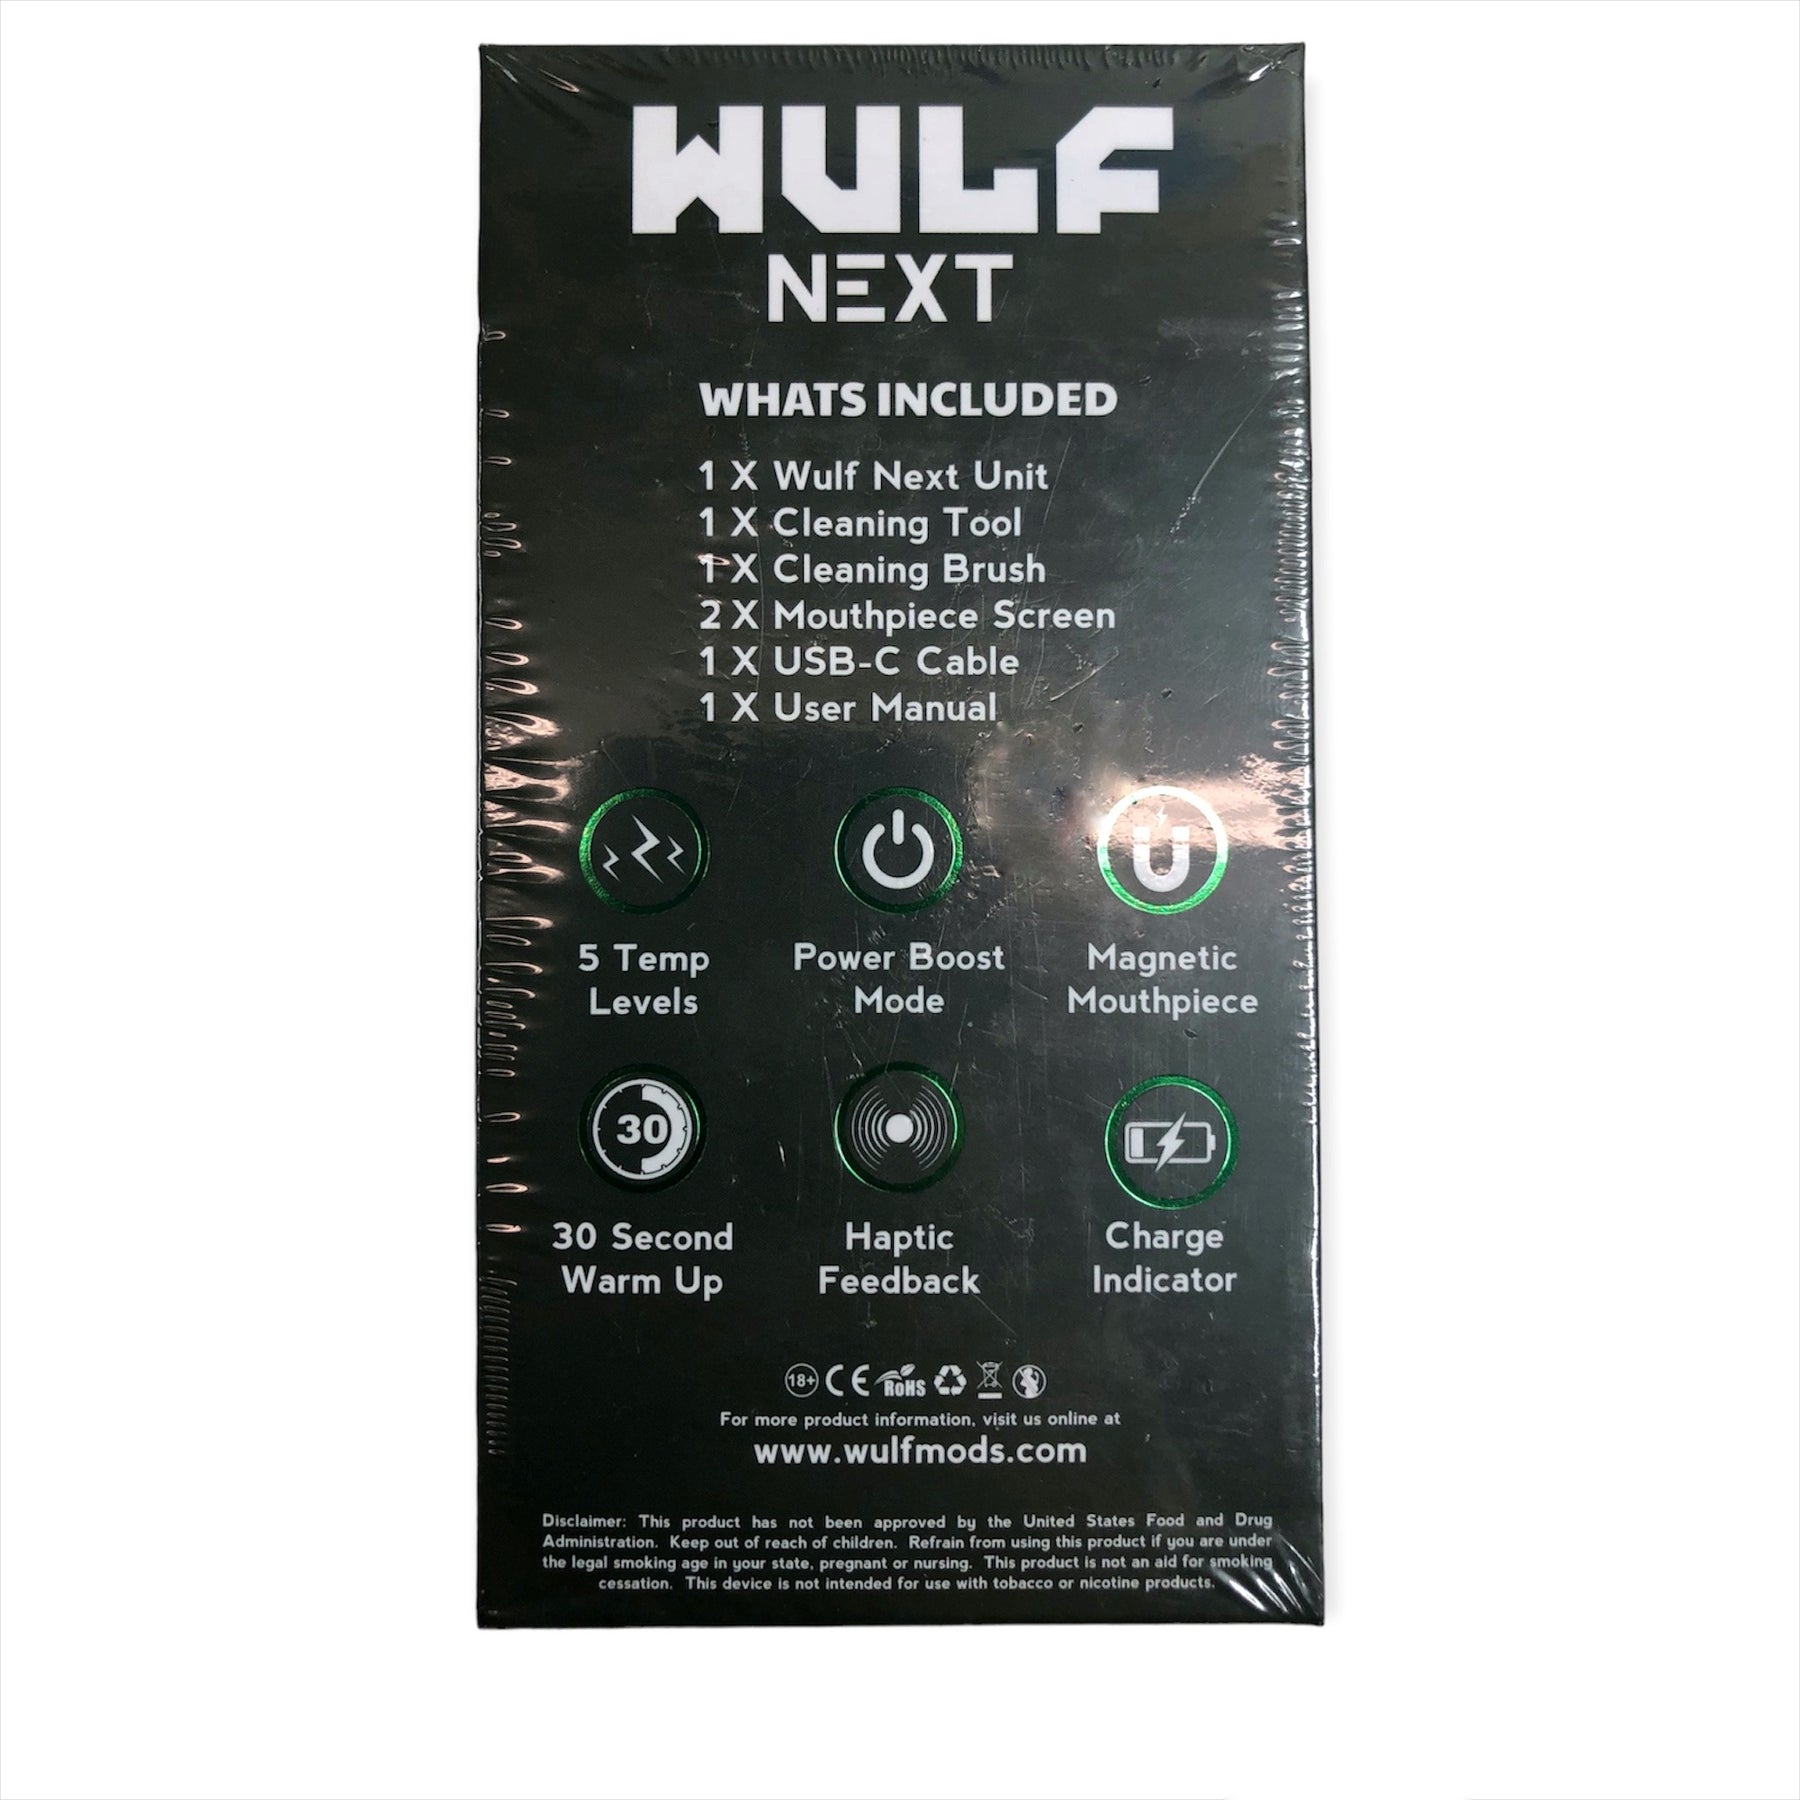 Wulf Next Dry Herb Vaporizer Box Color Green